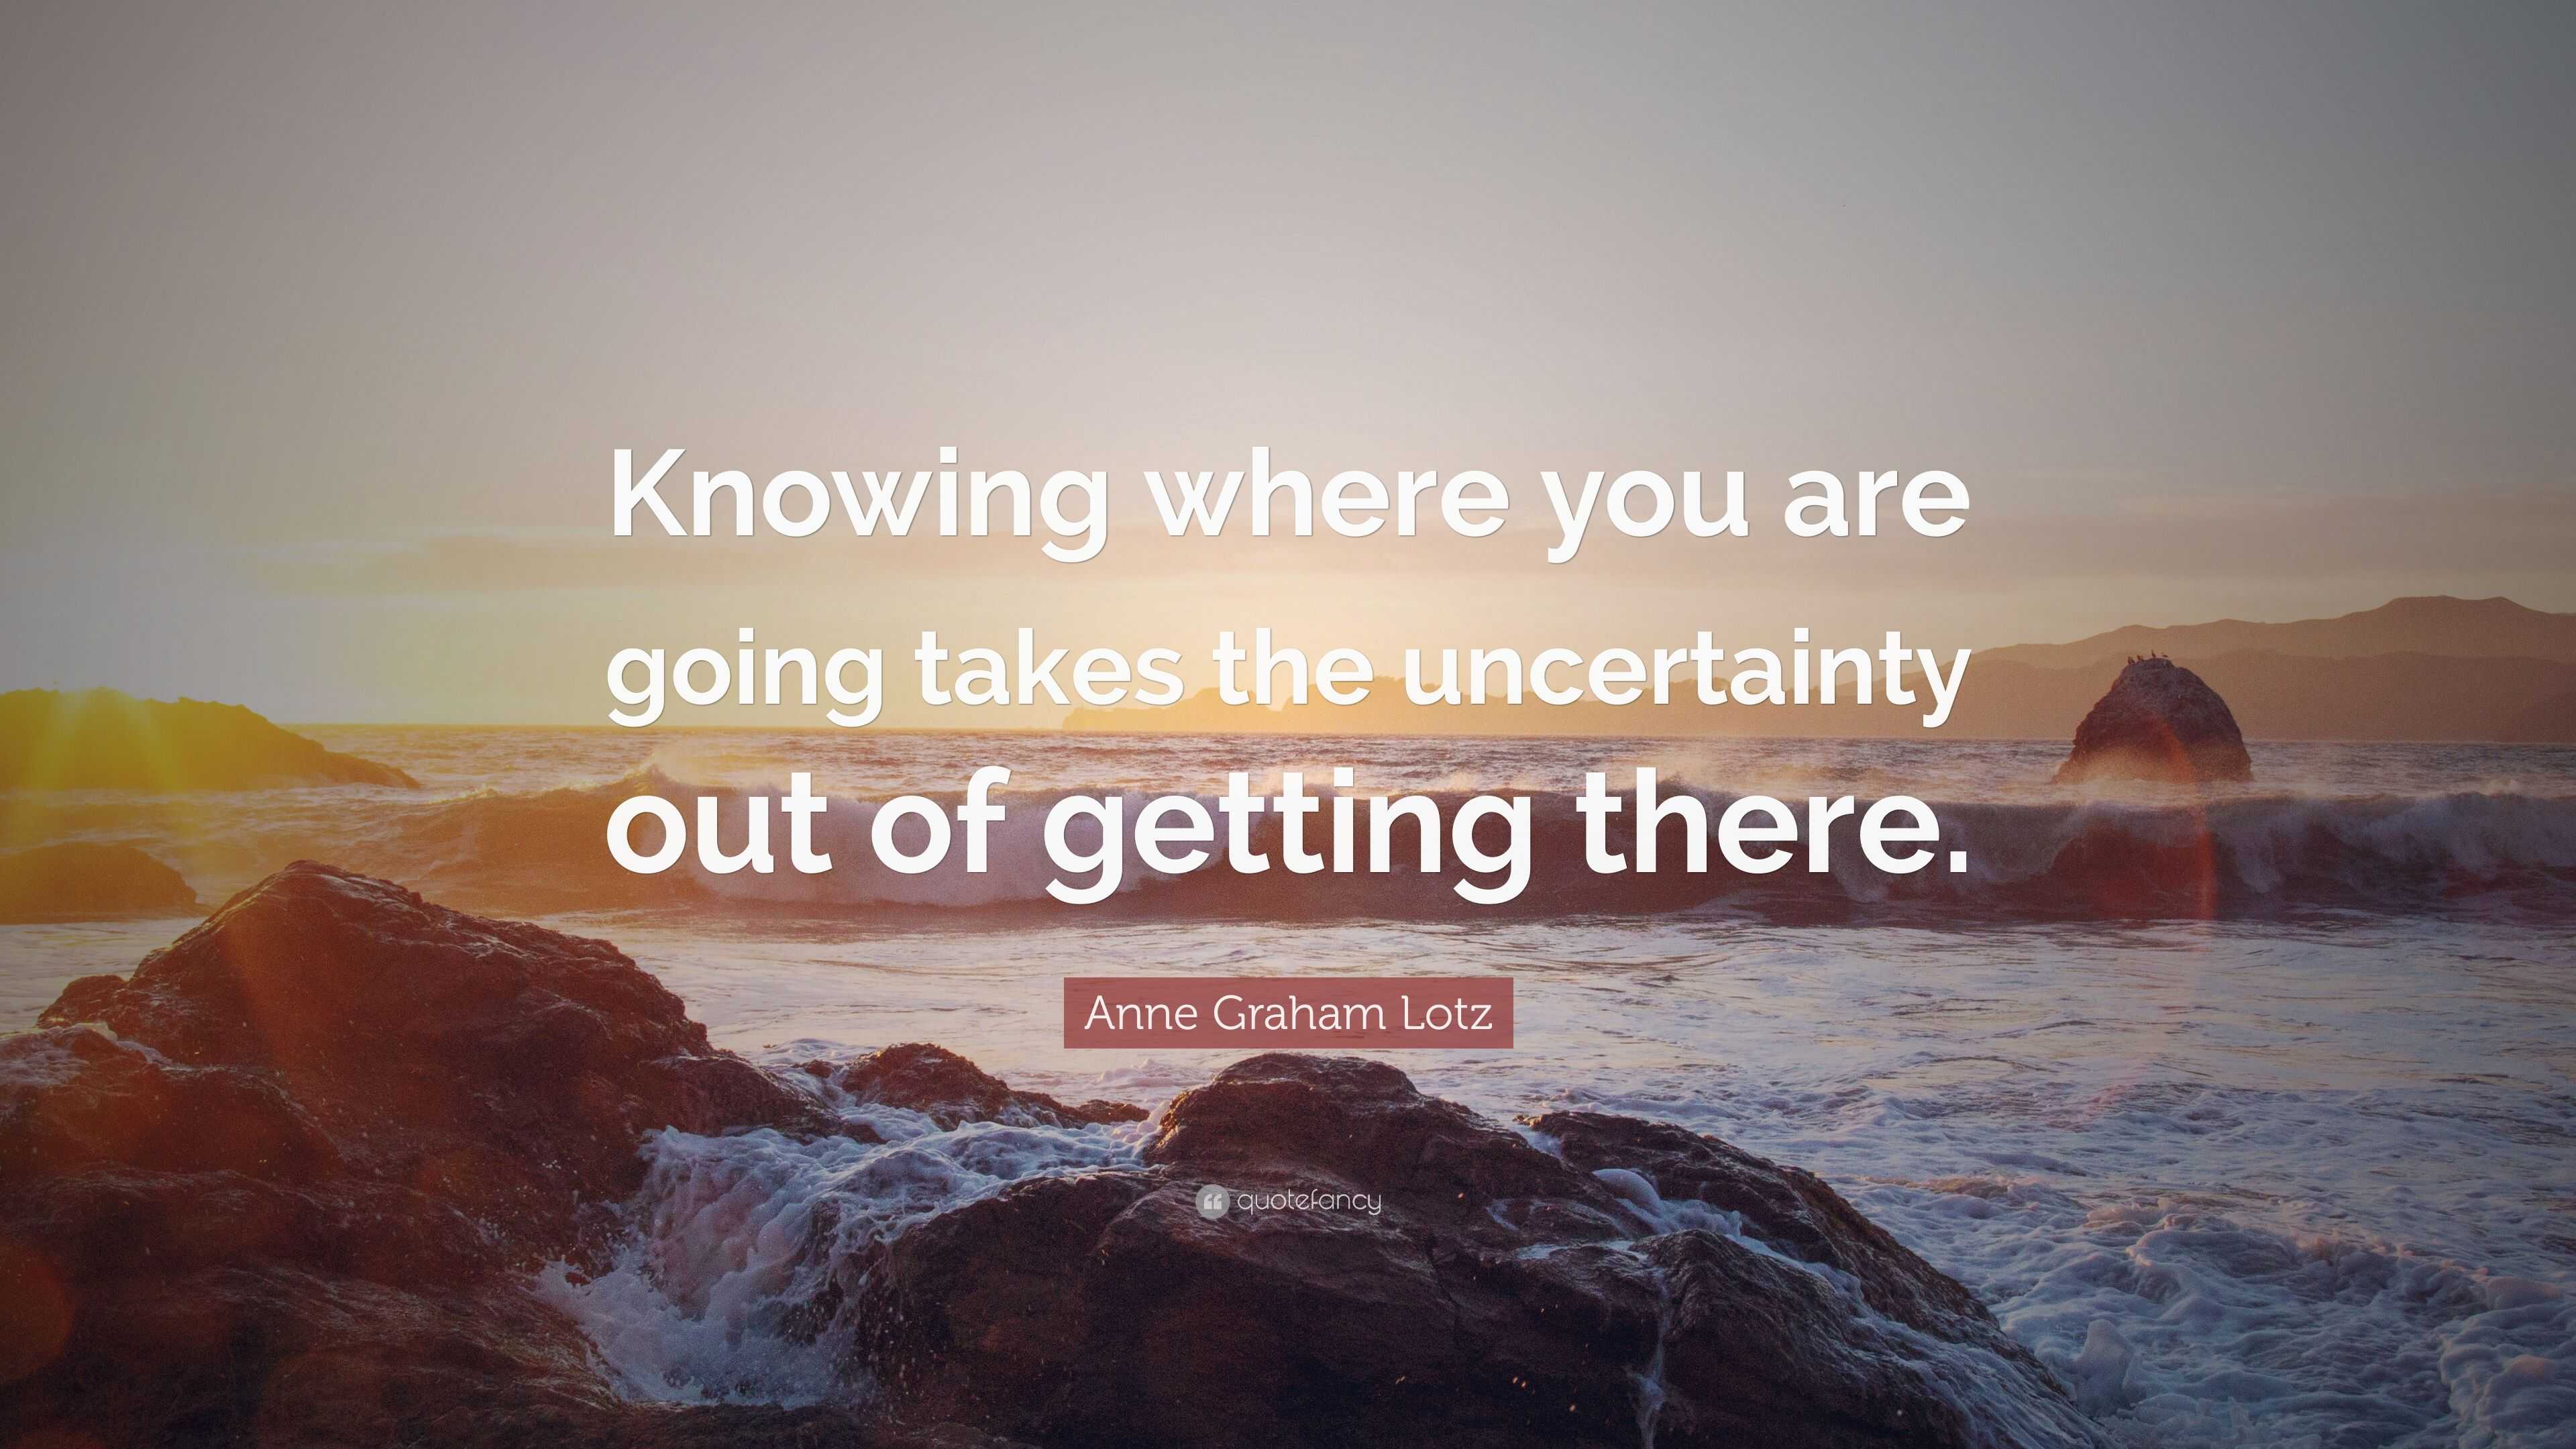 Anne Graham Lotz Quote: “Knowing where you are going takes the ...